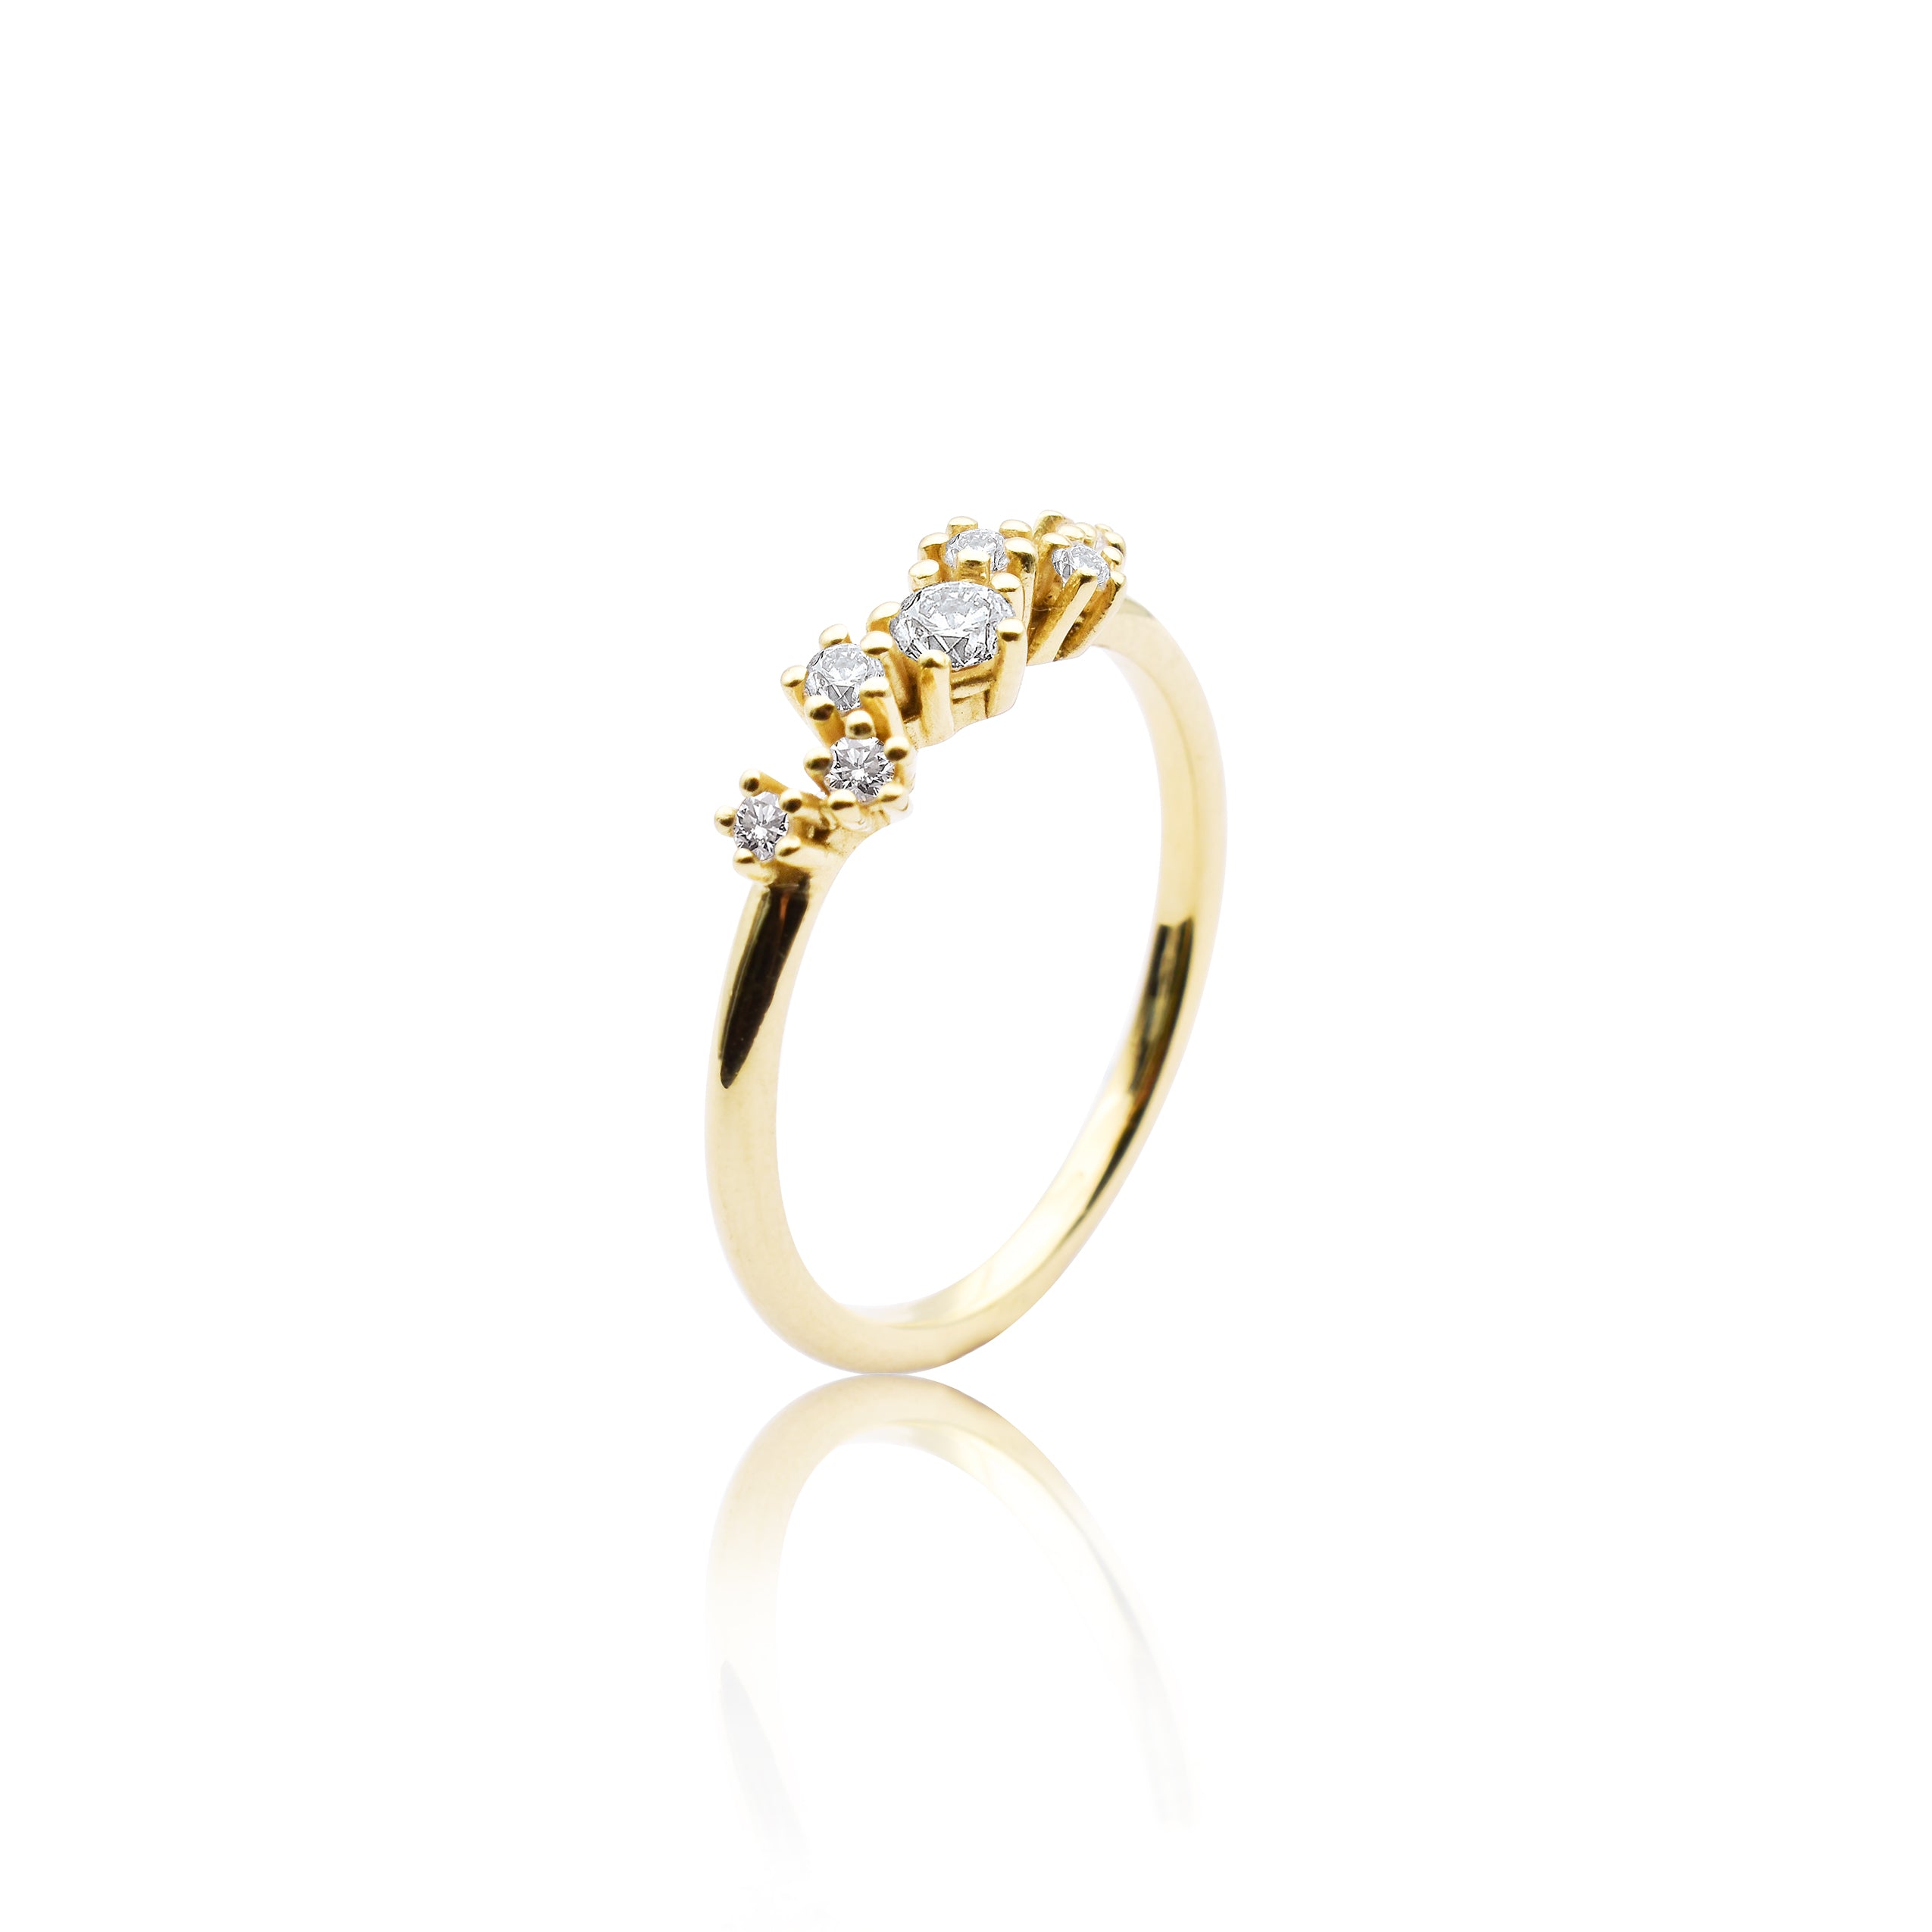 Sparkle ring "big" in 585 gold with 7 diamonds